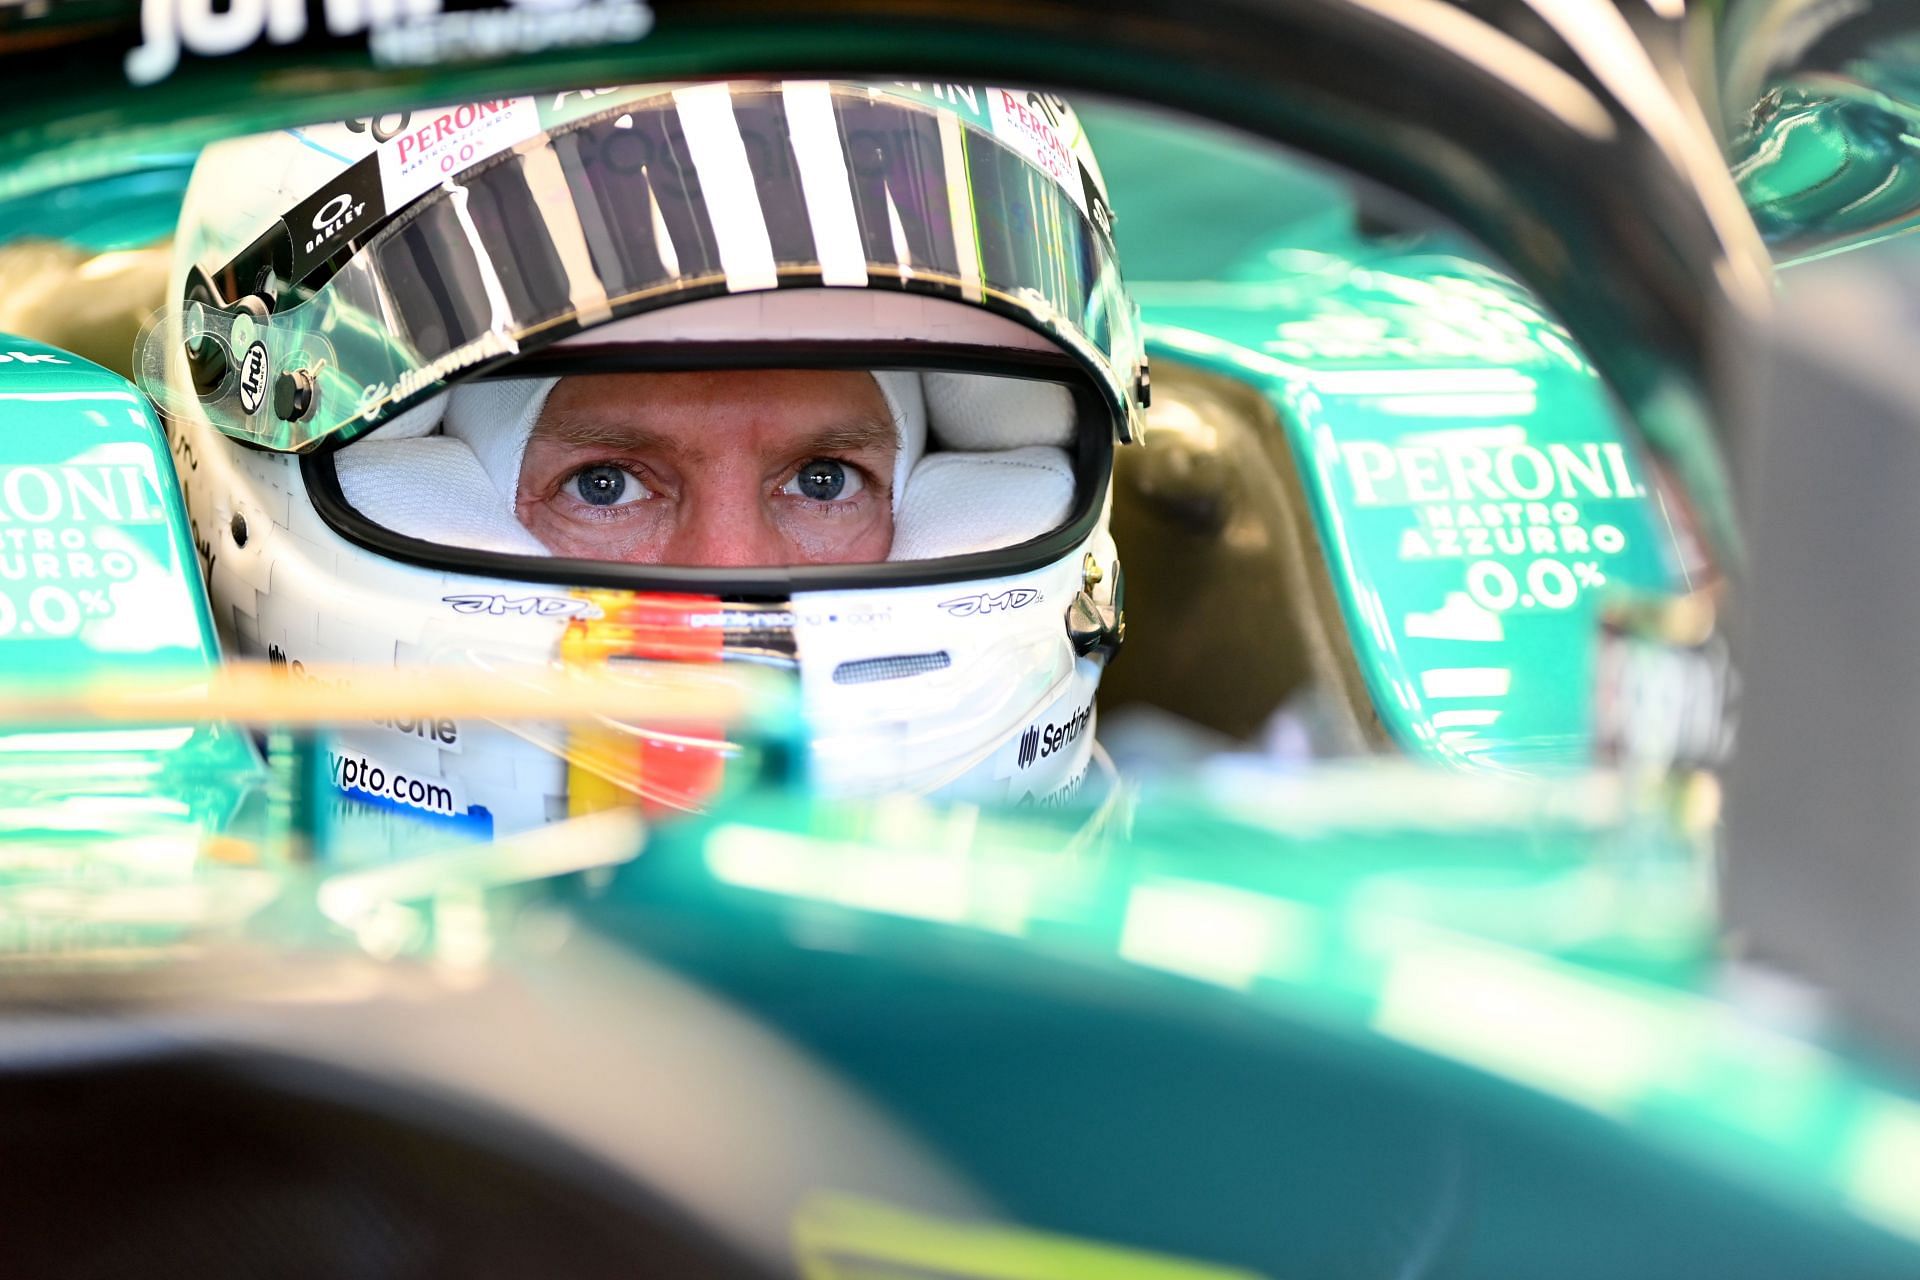 Sebastian Vettell during practice ahead of the F1 Grand Prix of Hungary at Hungaroring on July 29, 2022 in Budapest, Hungary. (Photo by Dan Mullan/Getty Images)